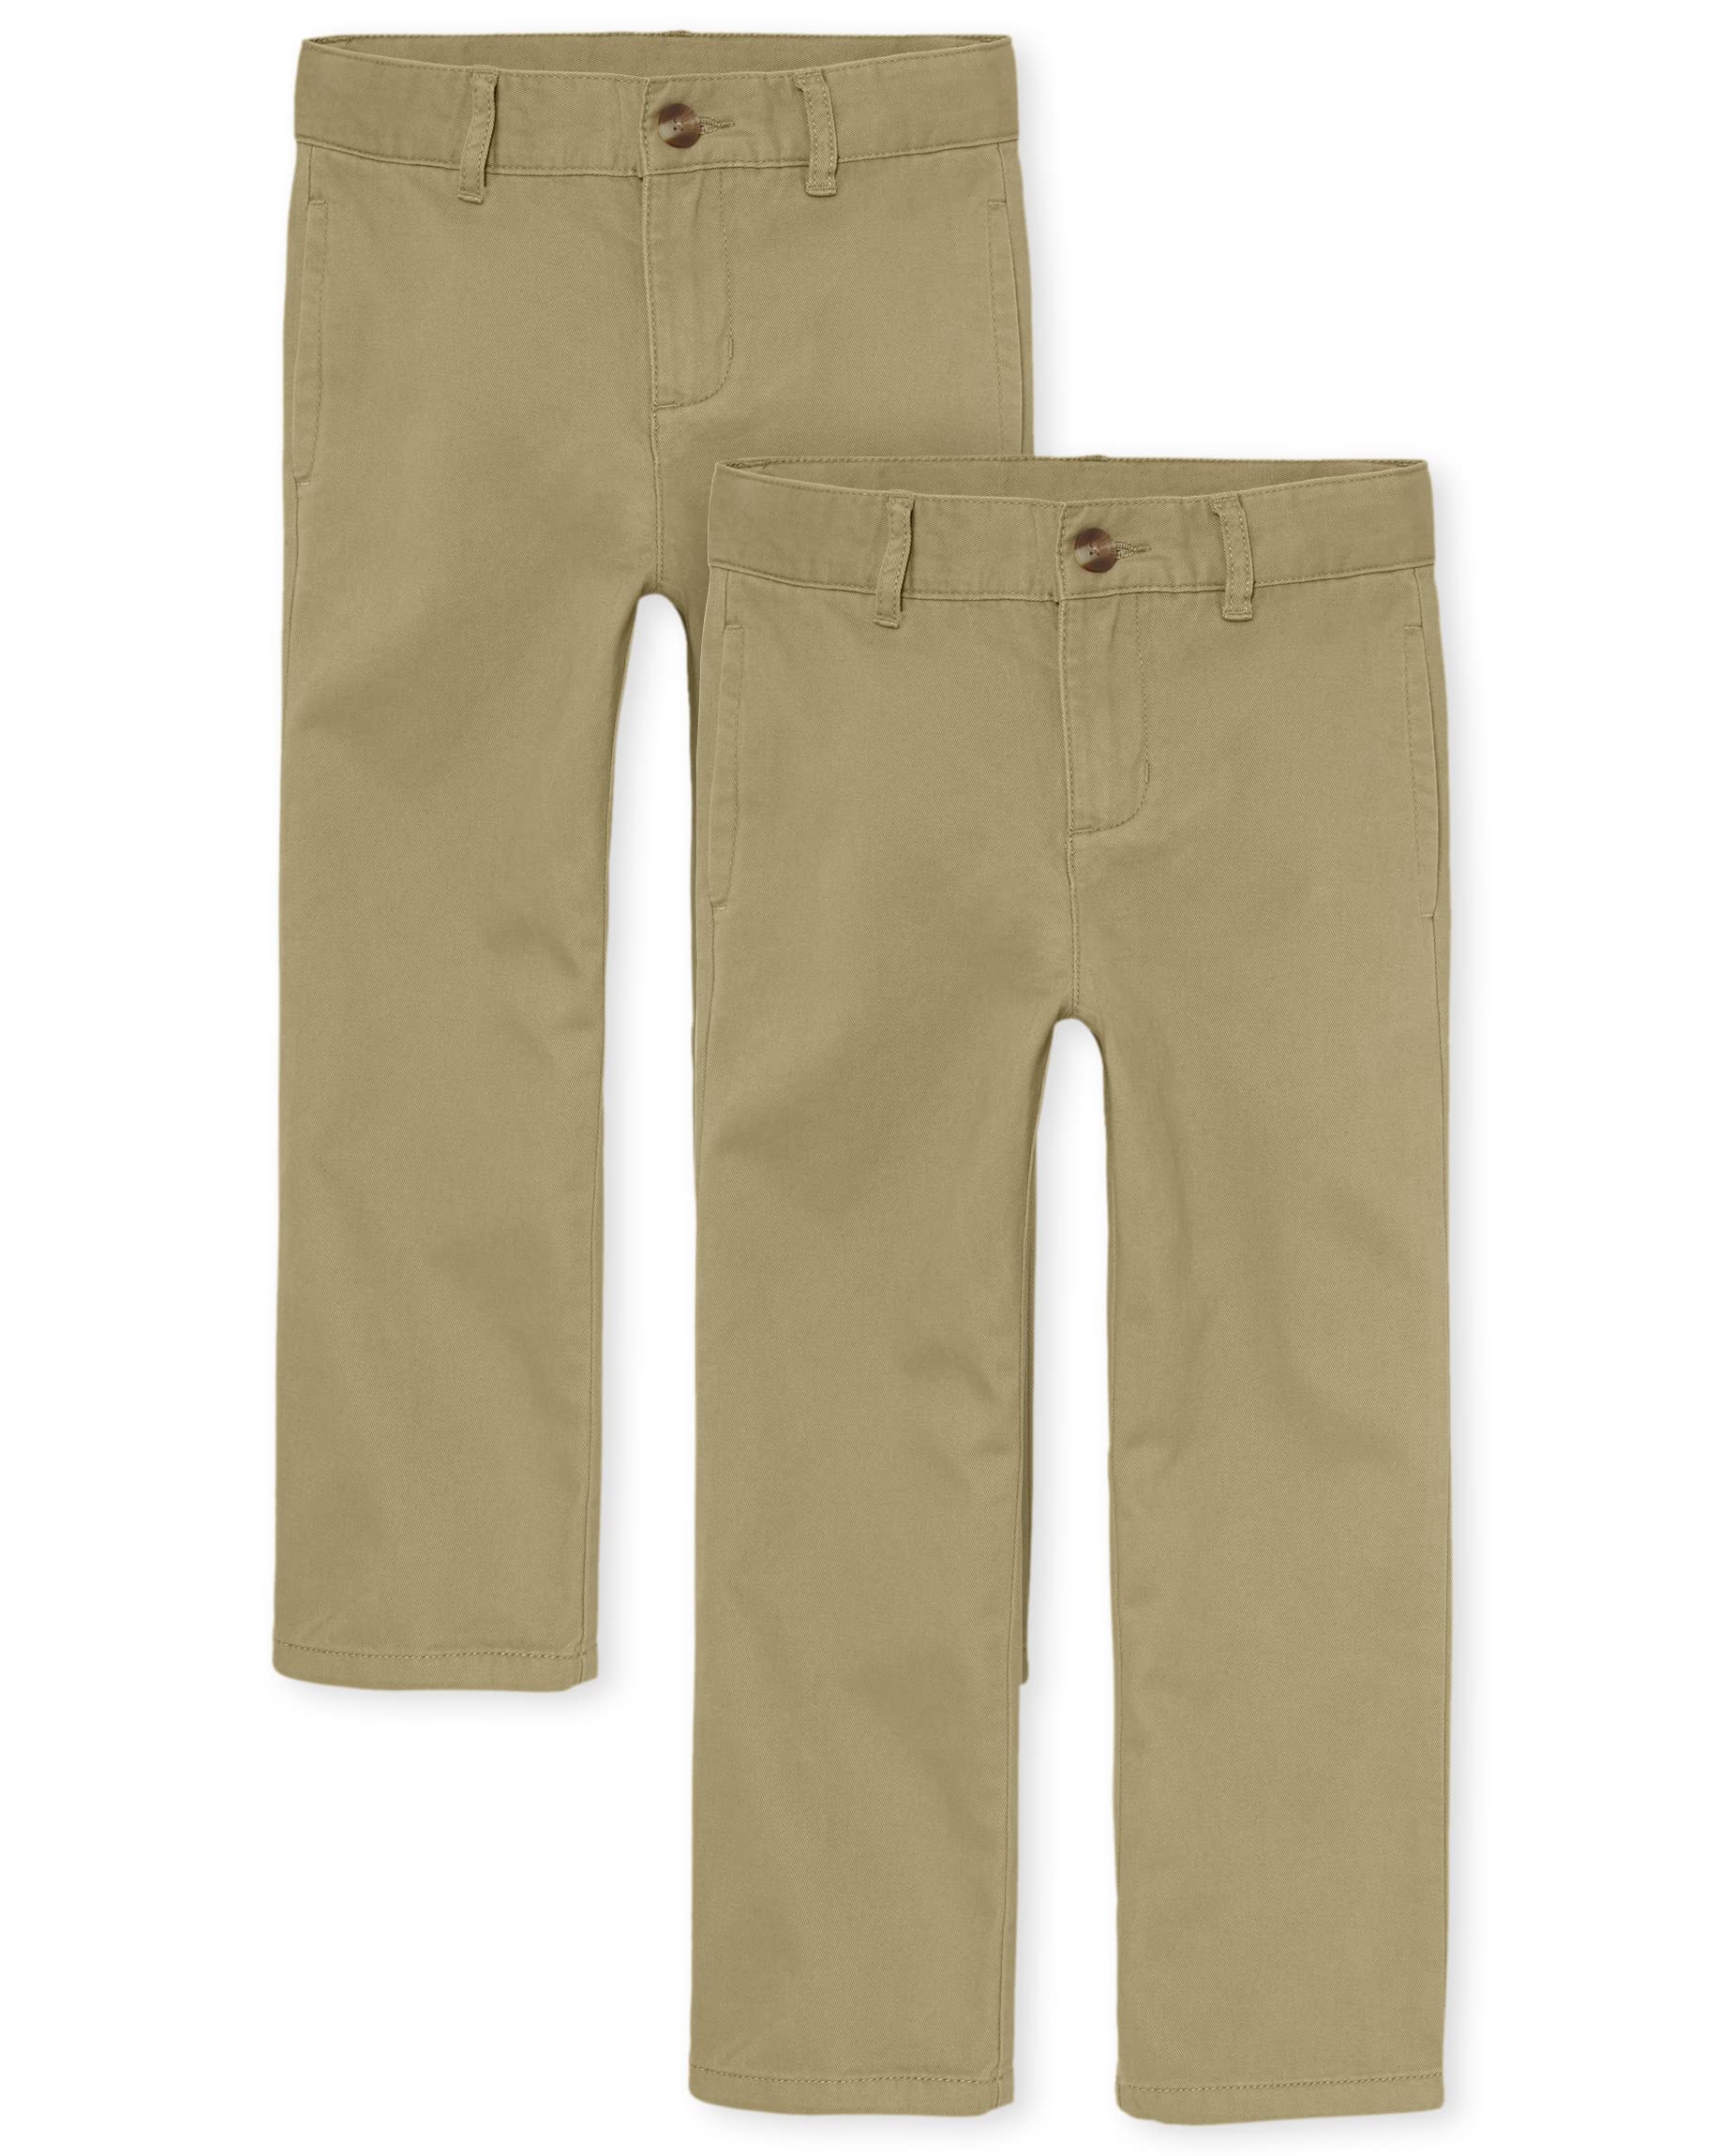 The Children's Place boys Uniform Straight Chino Pants 2 Pack